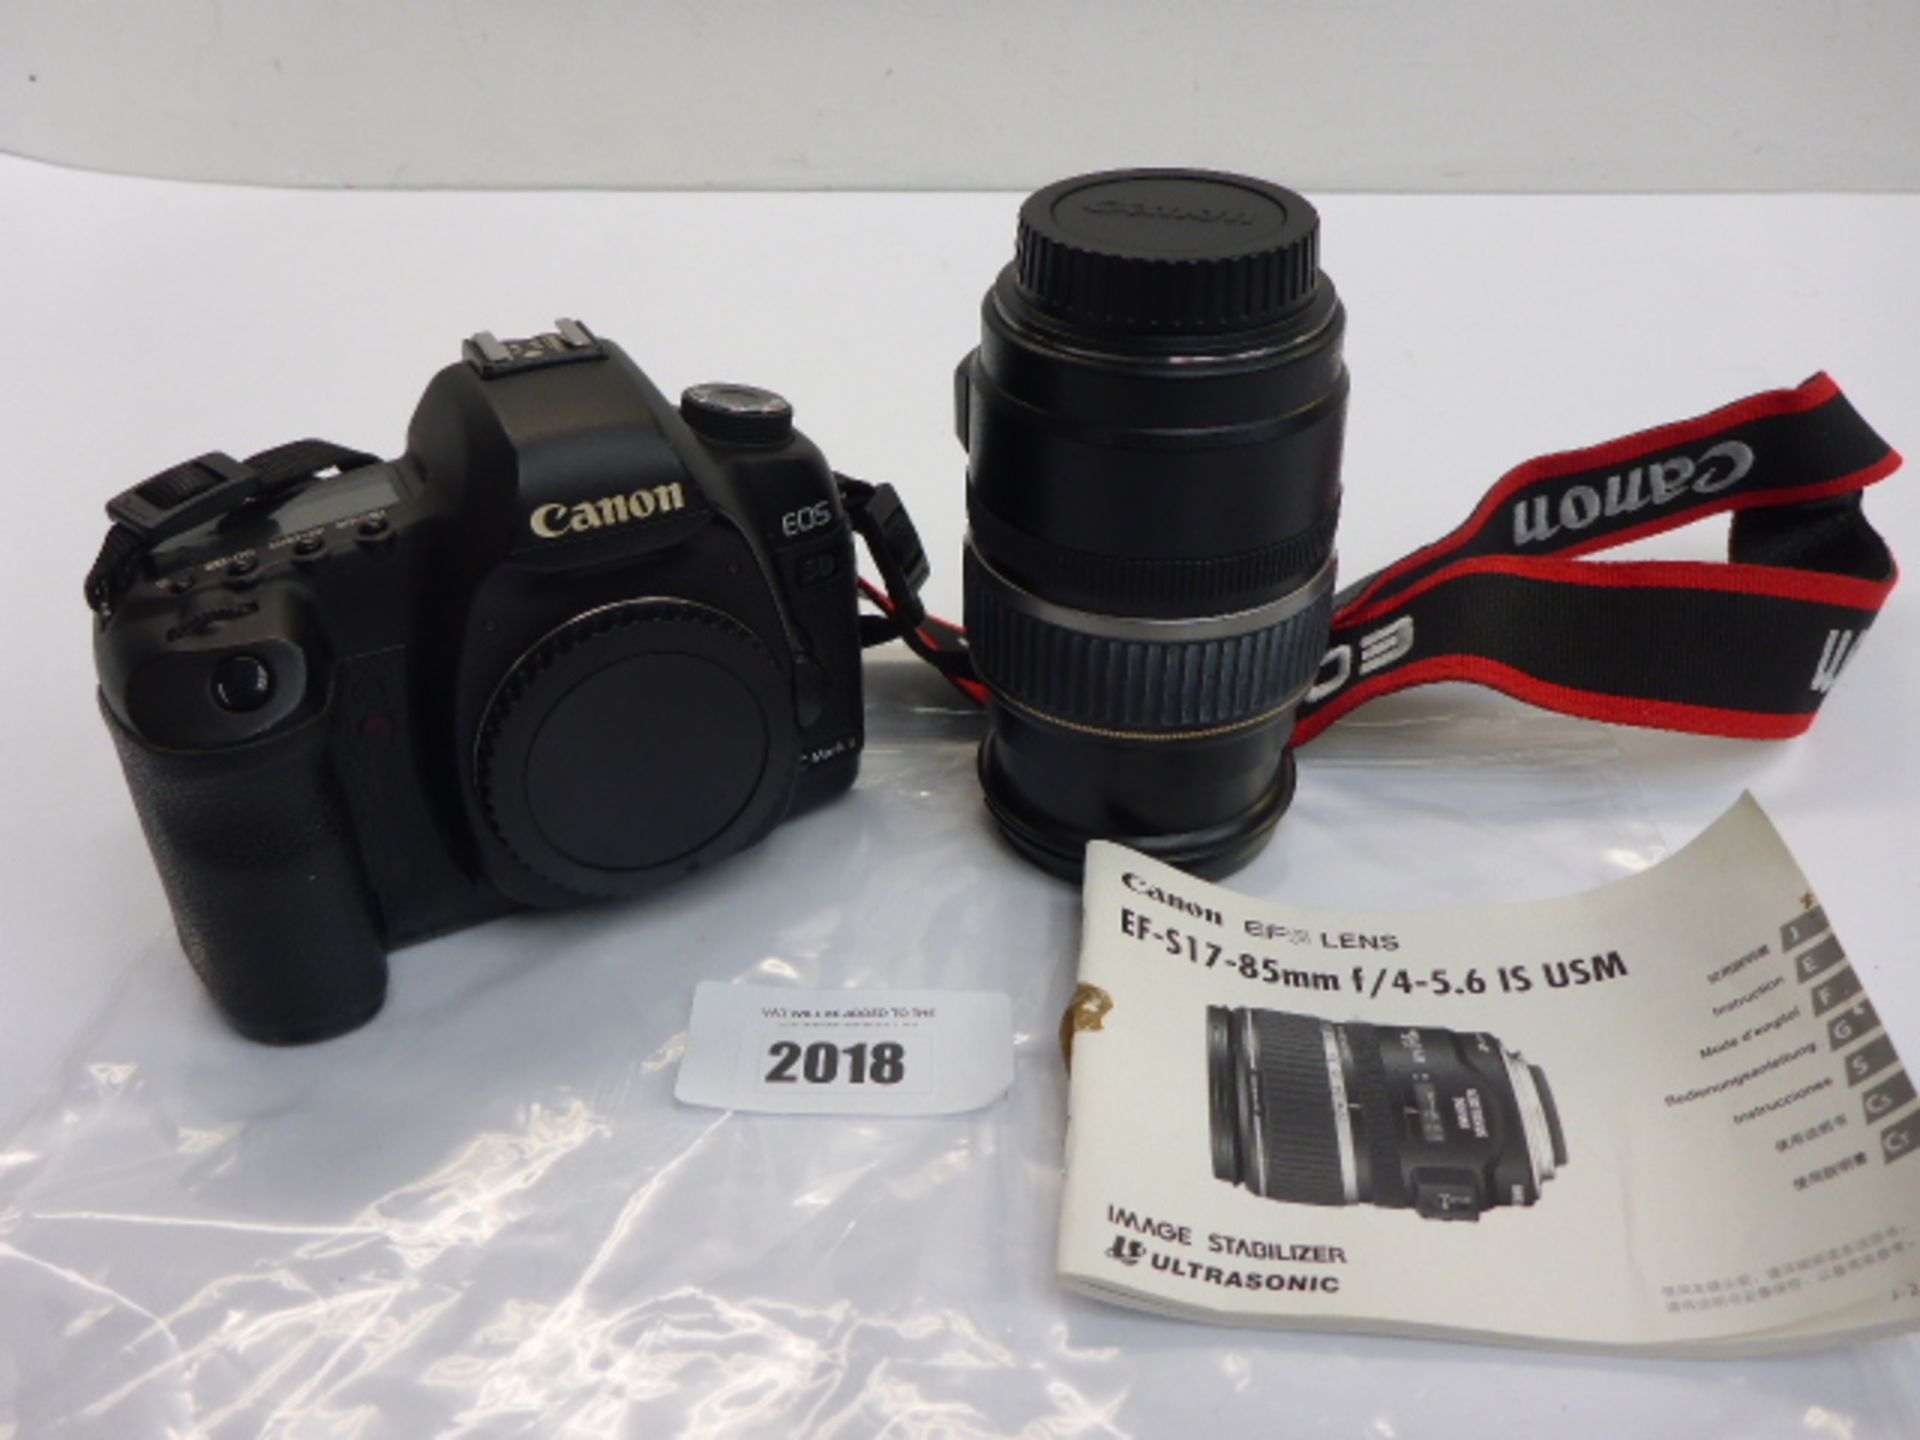 Canon EOS 5D Mark II SLR camera with Canon EFS 17-85mm lens